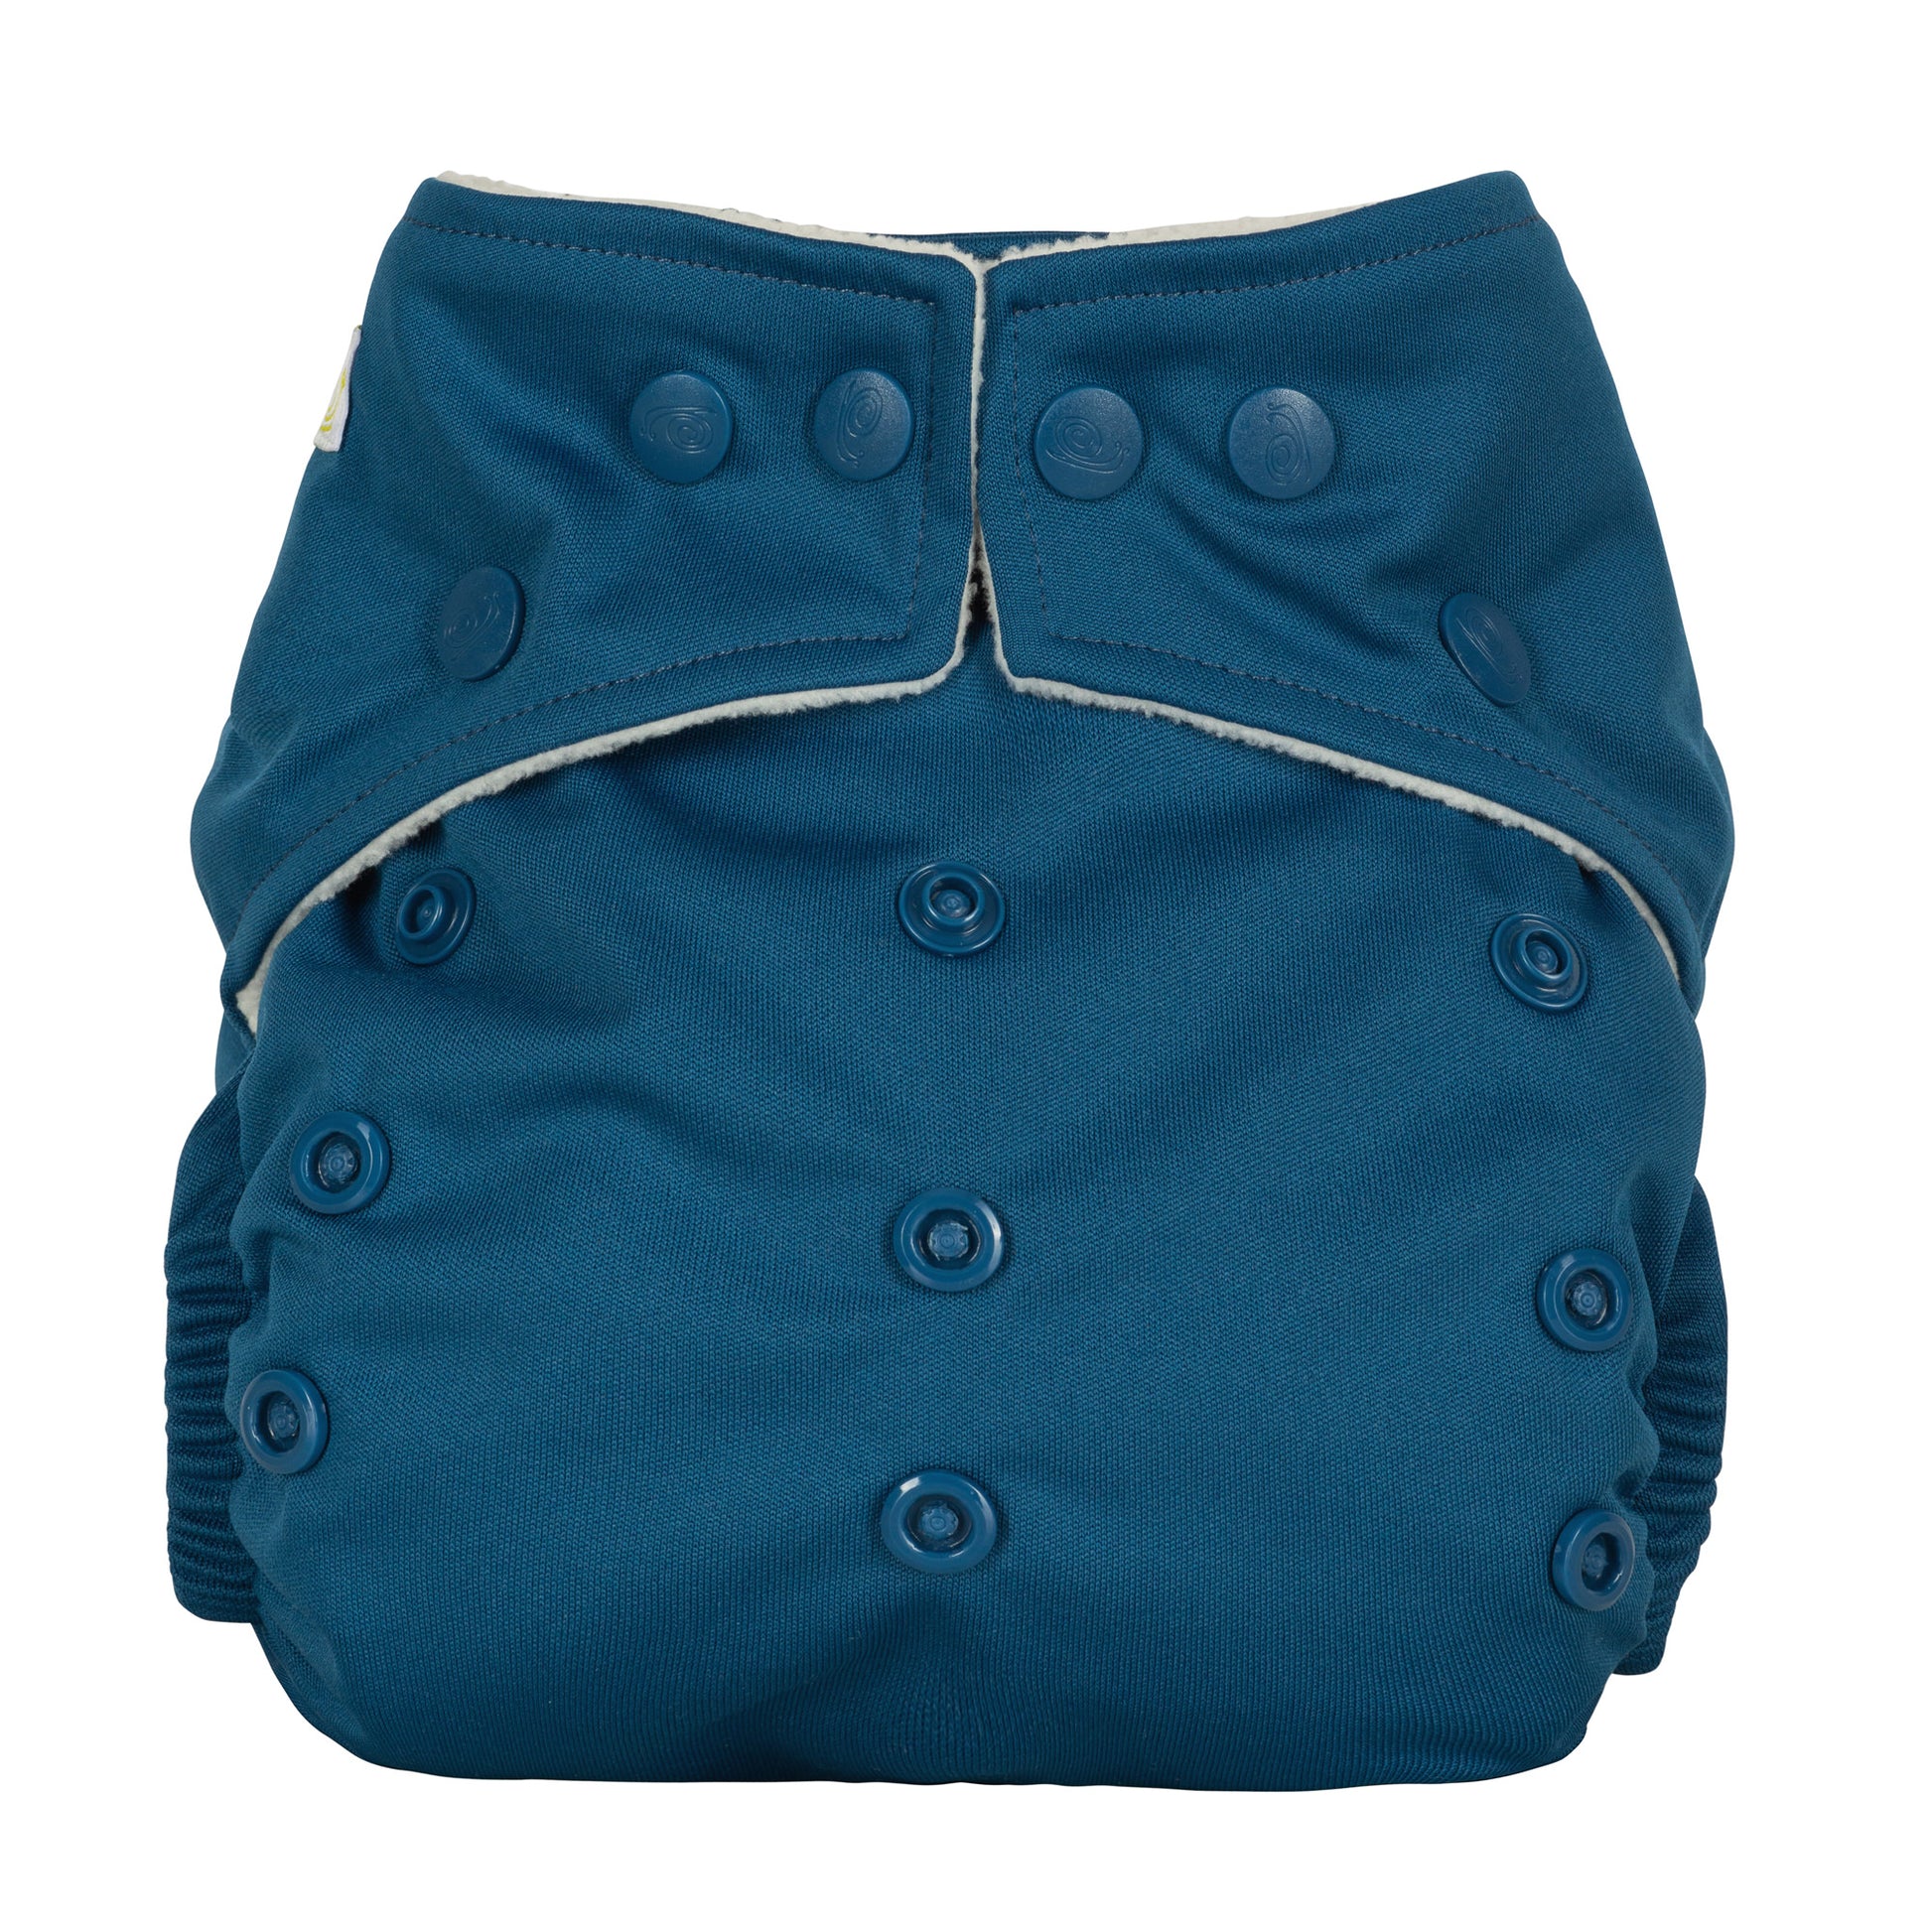 Dark blue reusable cloth nappy with poppers around the waist and rise snaps across the front.